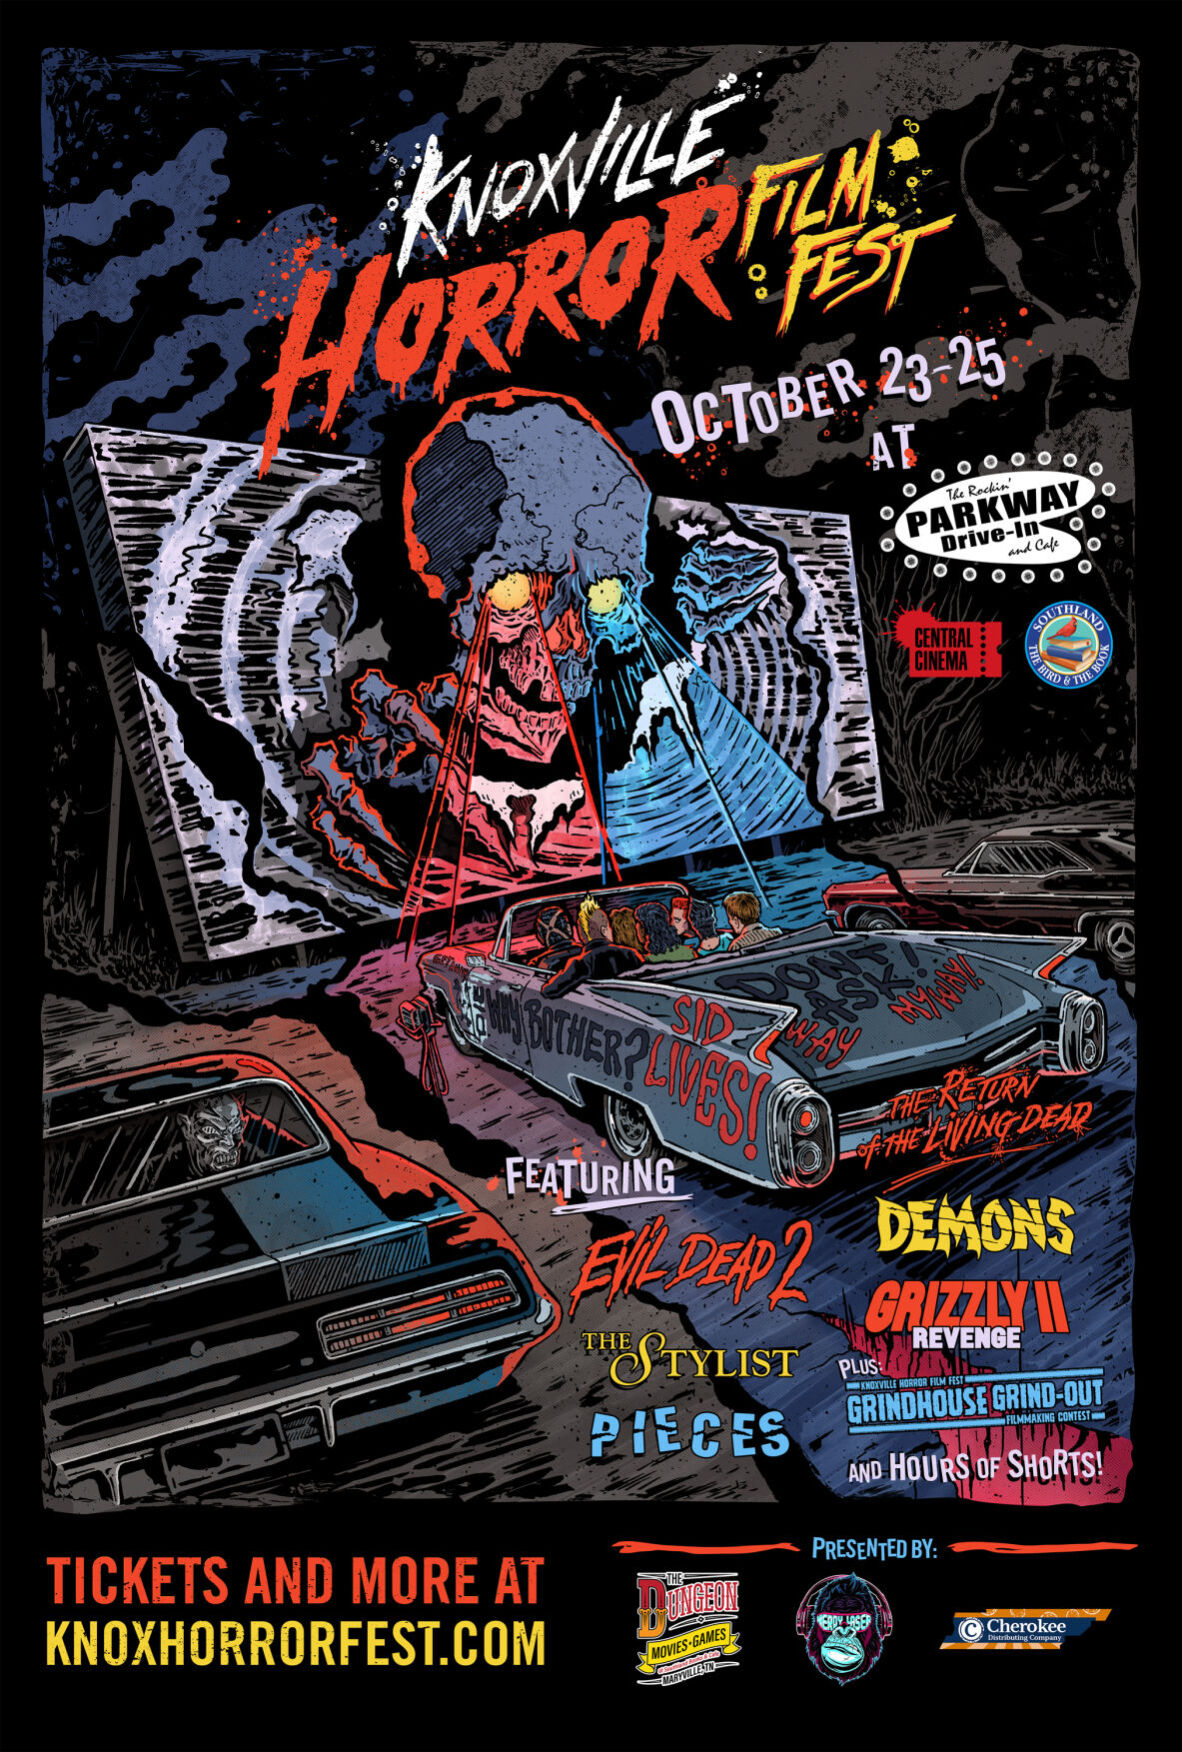 SOMETHING WICKED THIS WAY COMES Knoxville Horror Film Fest descends on